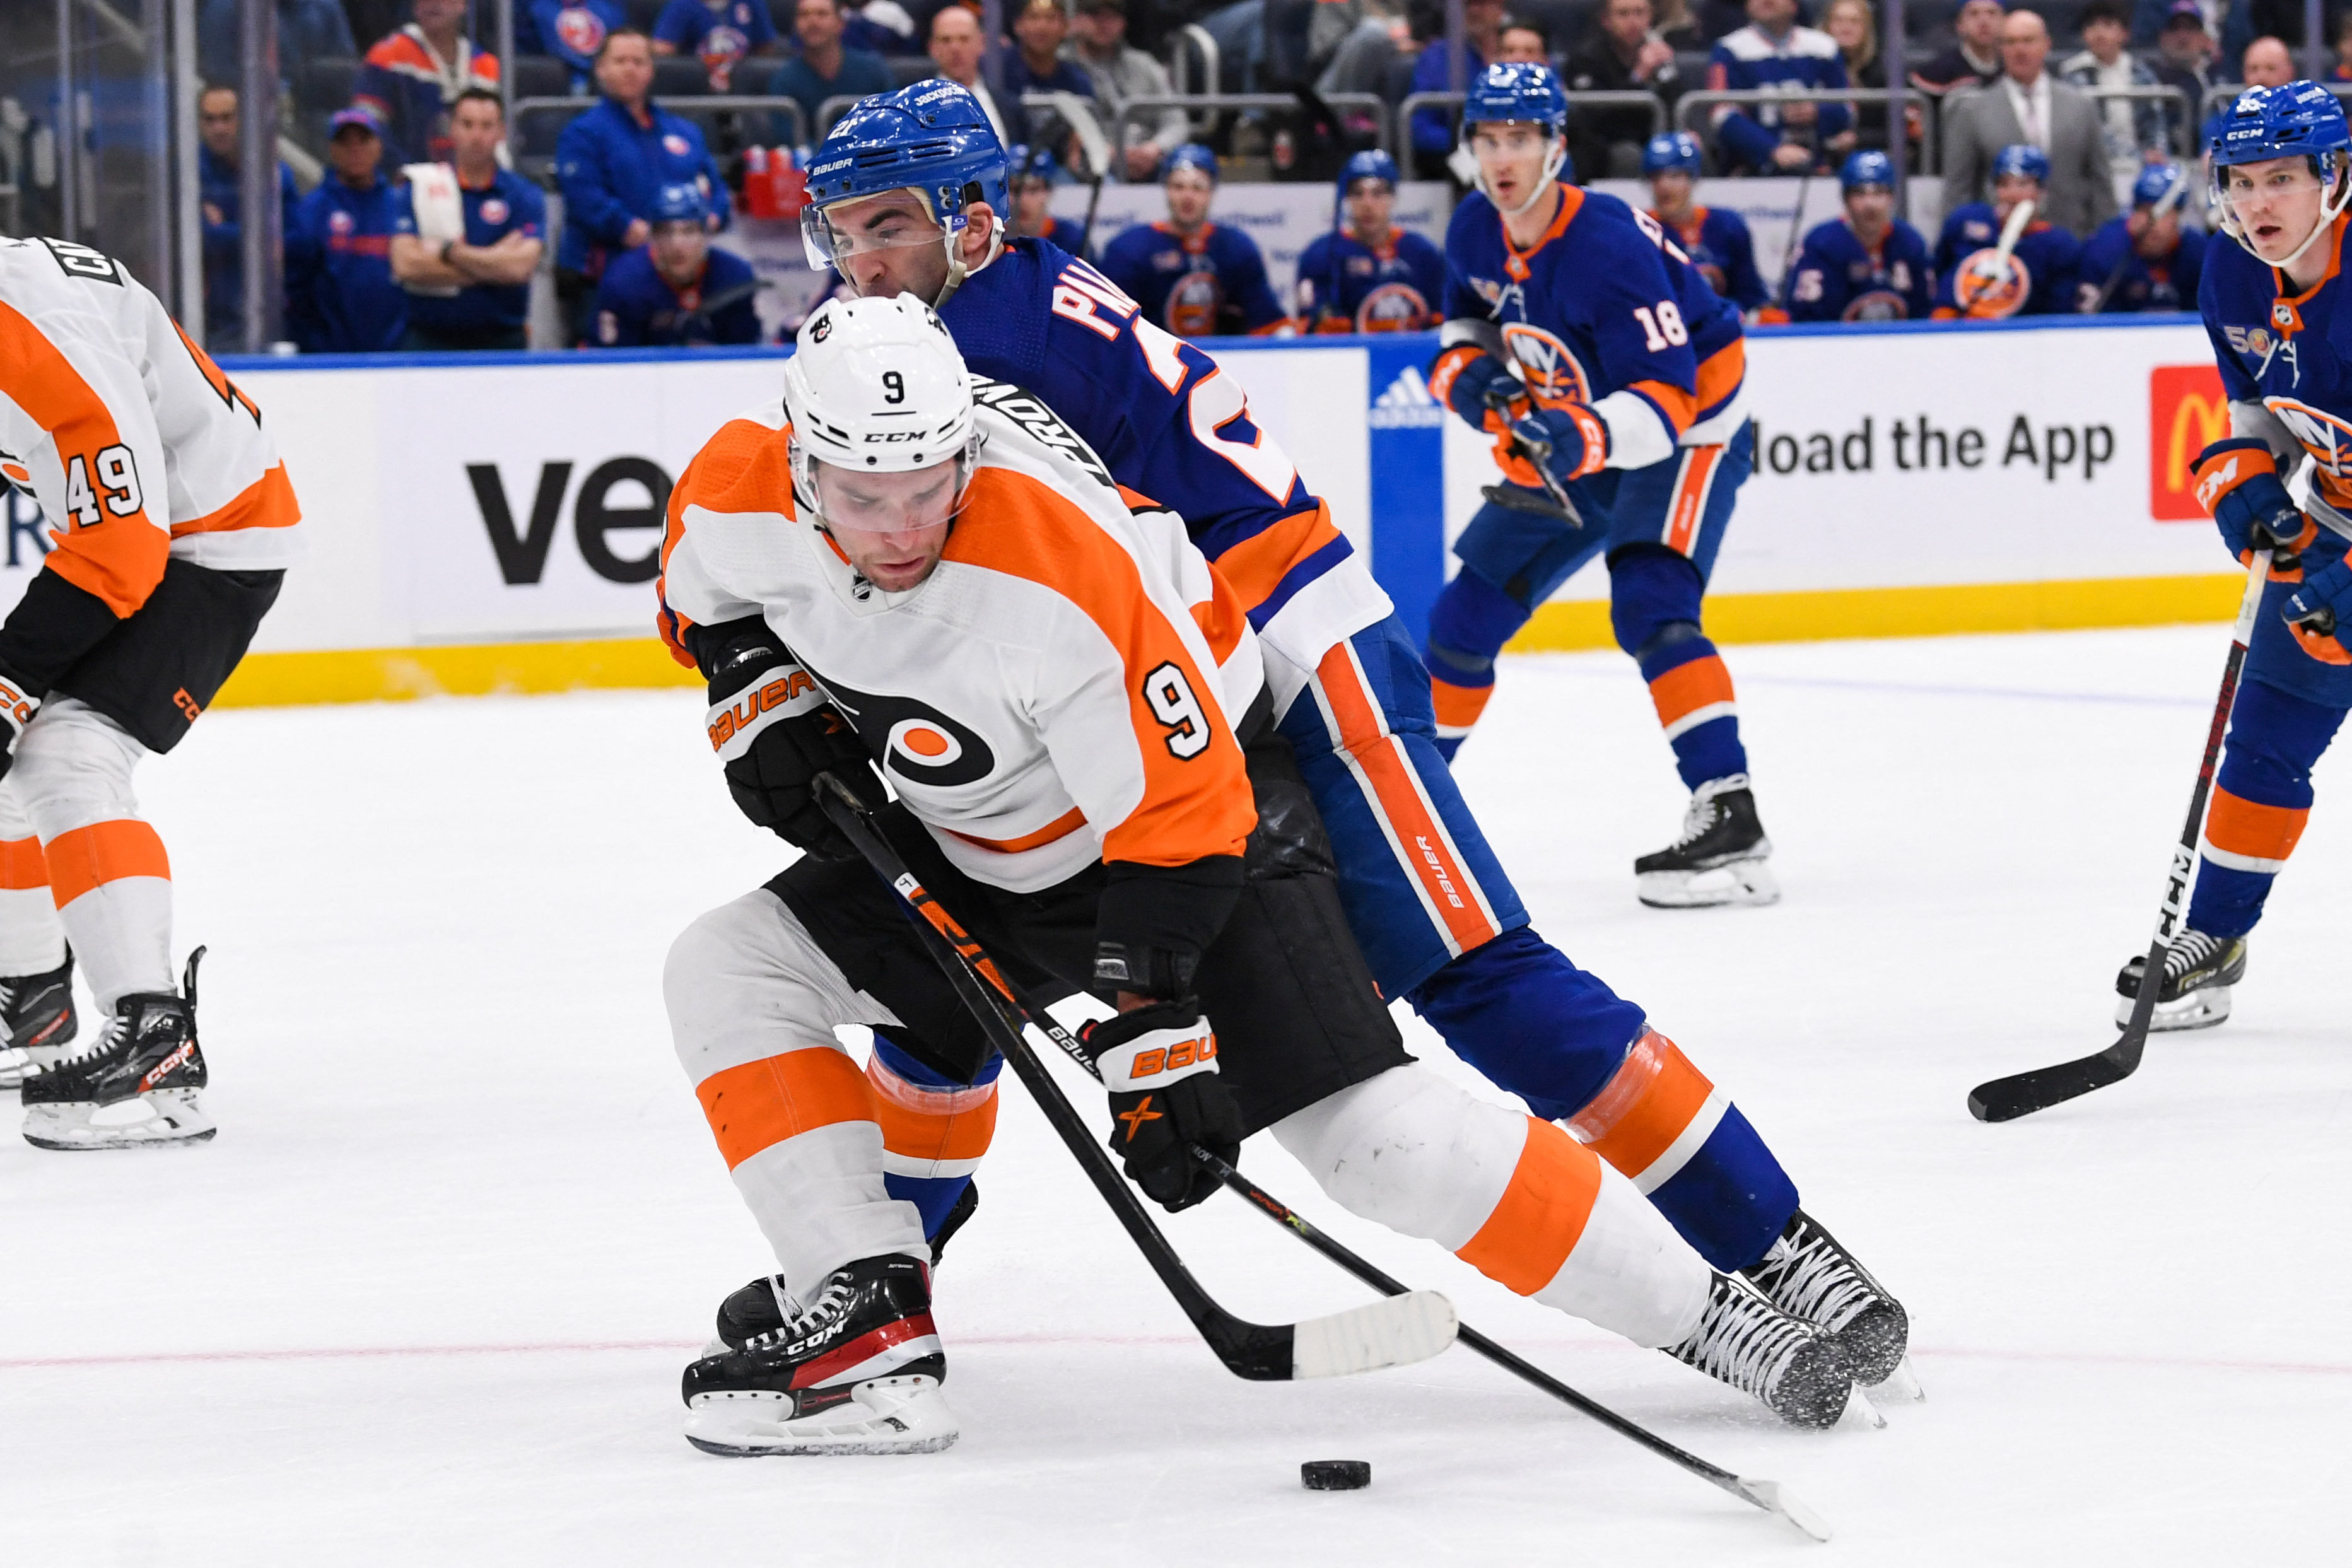 Ivan Provorov part of 3-way trade between Flyers, Kings, Blue Jackets ...